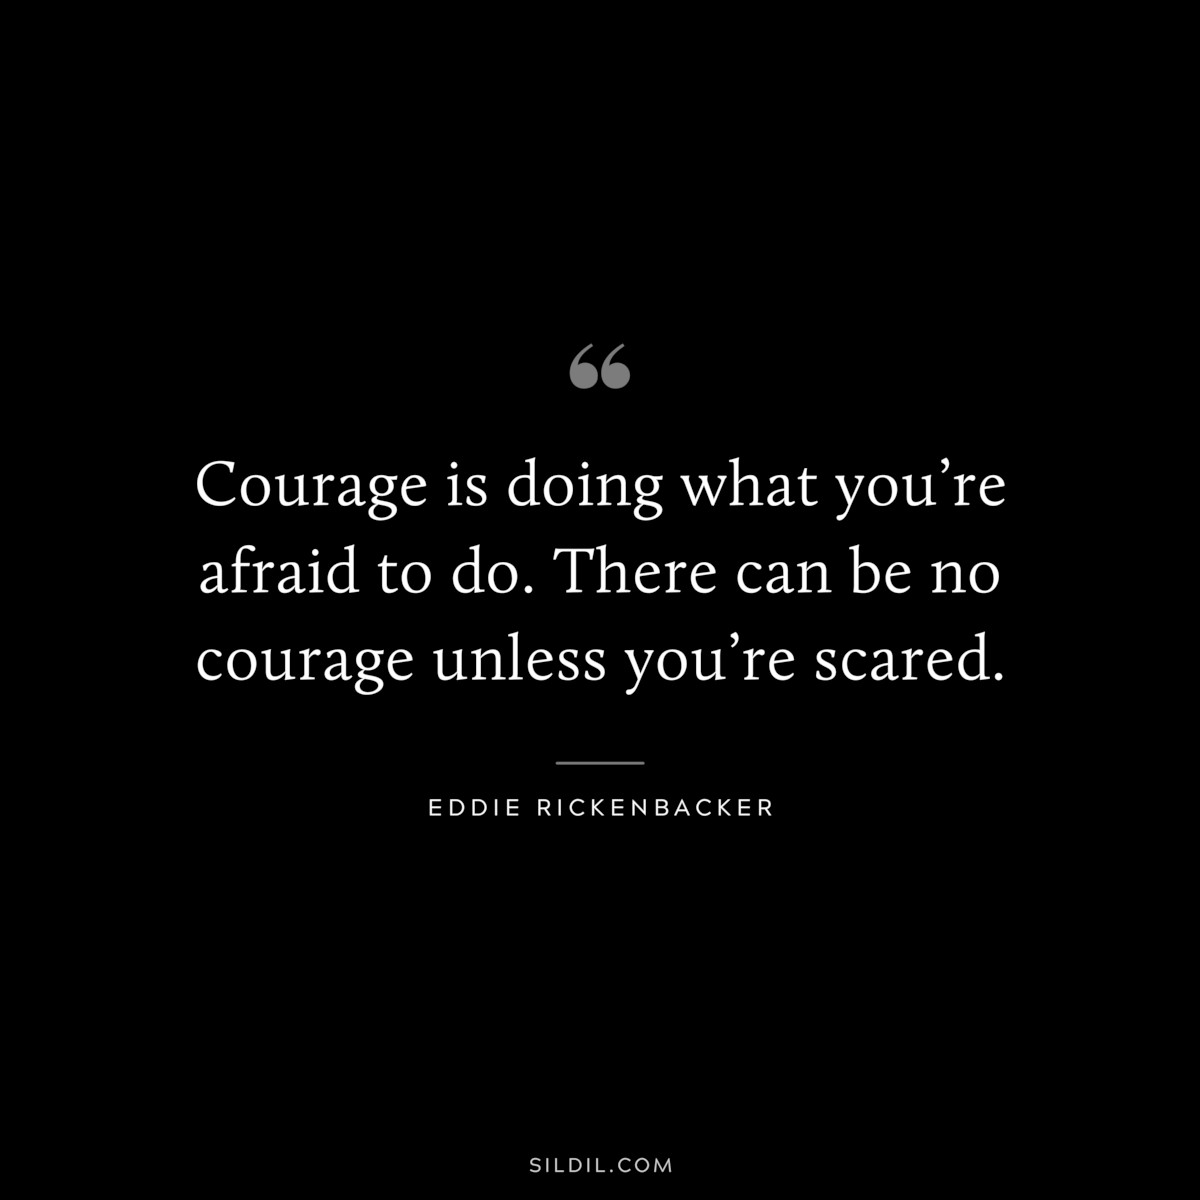 Courage is doing what you’re afraid to do. There can be no courage unless you’re scared. ― Eddie Rickenbacker